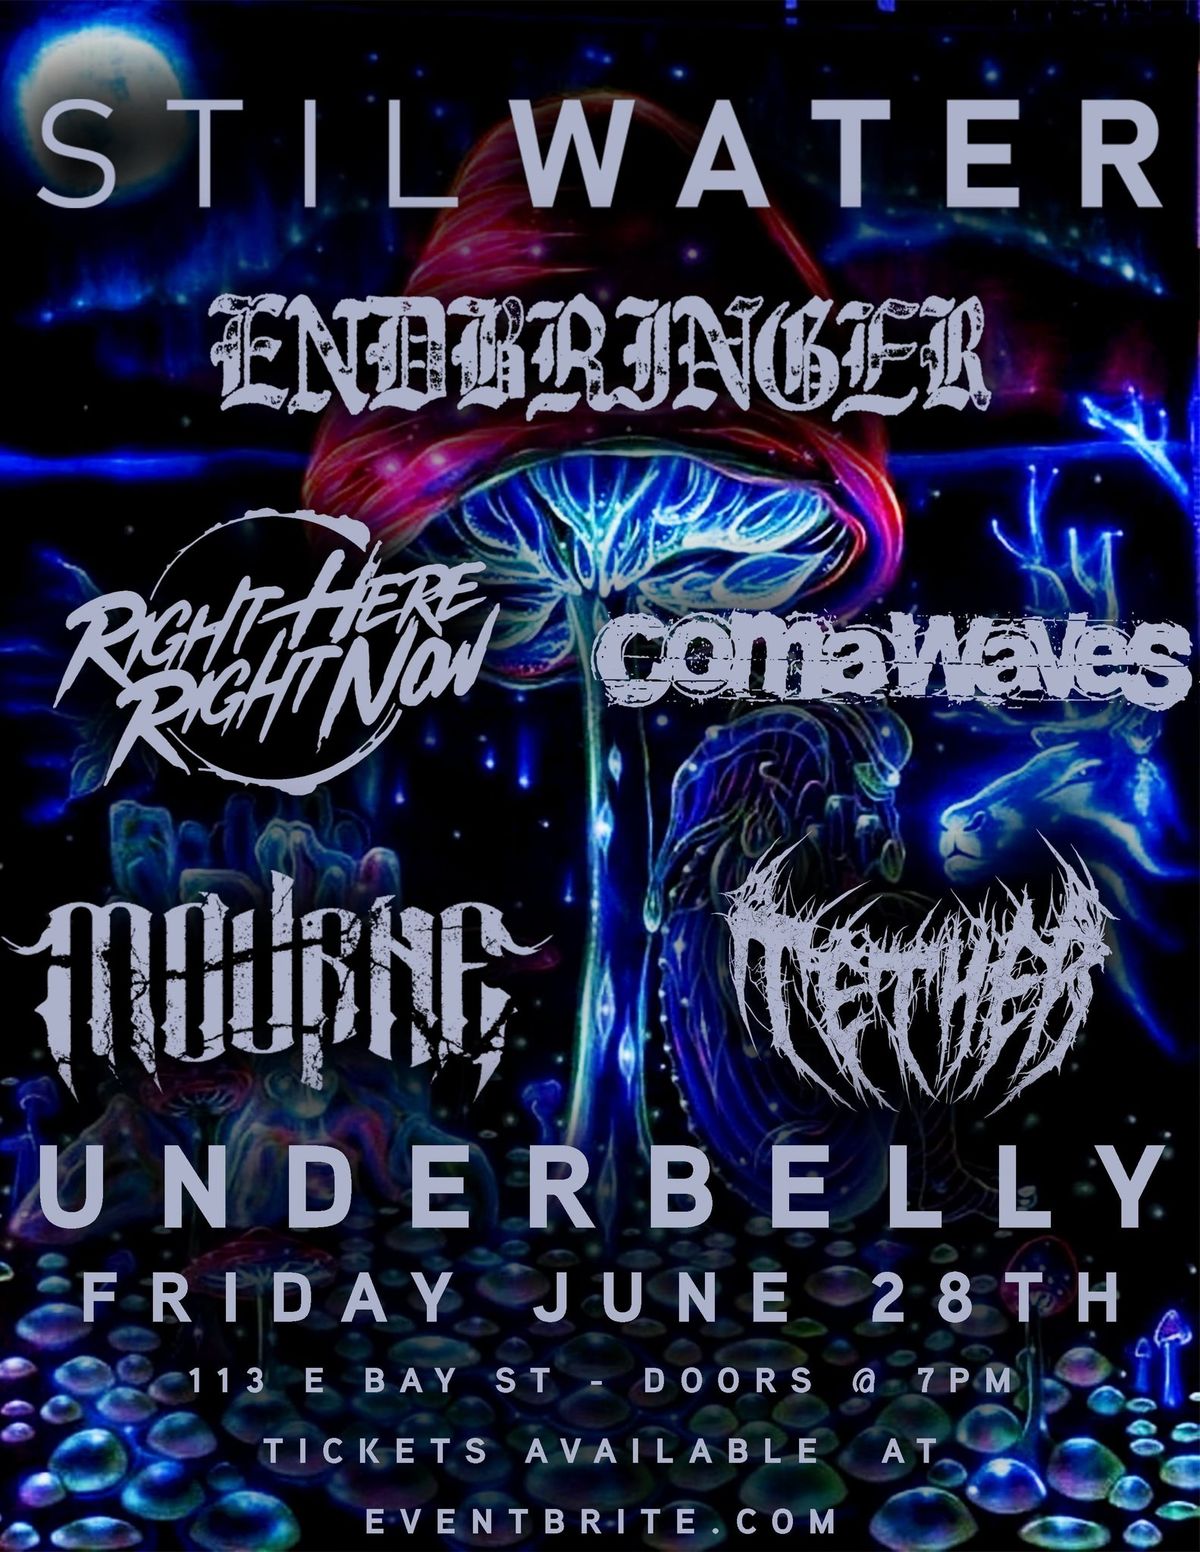 STILWATER,ENDBRINGER,RIGHT HERE RIGHT NOW,COMA WAVES,TETHER,AND MOURNE @ UNDERBELLY!